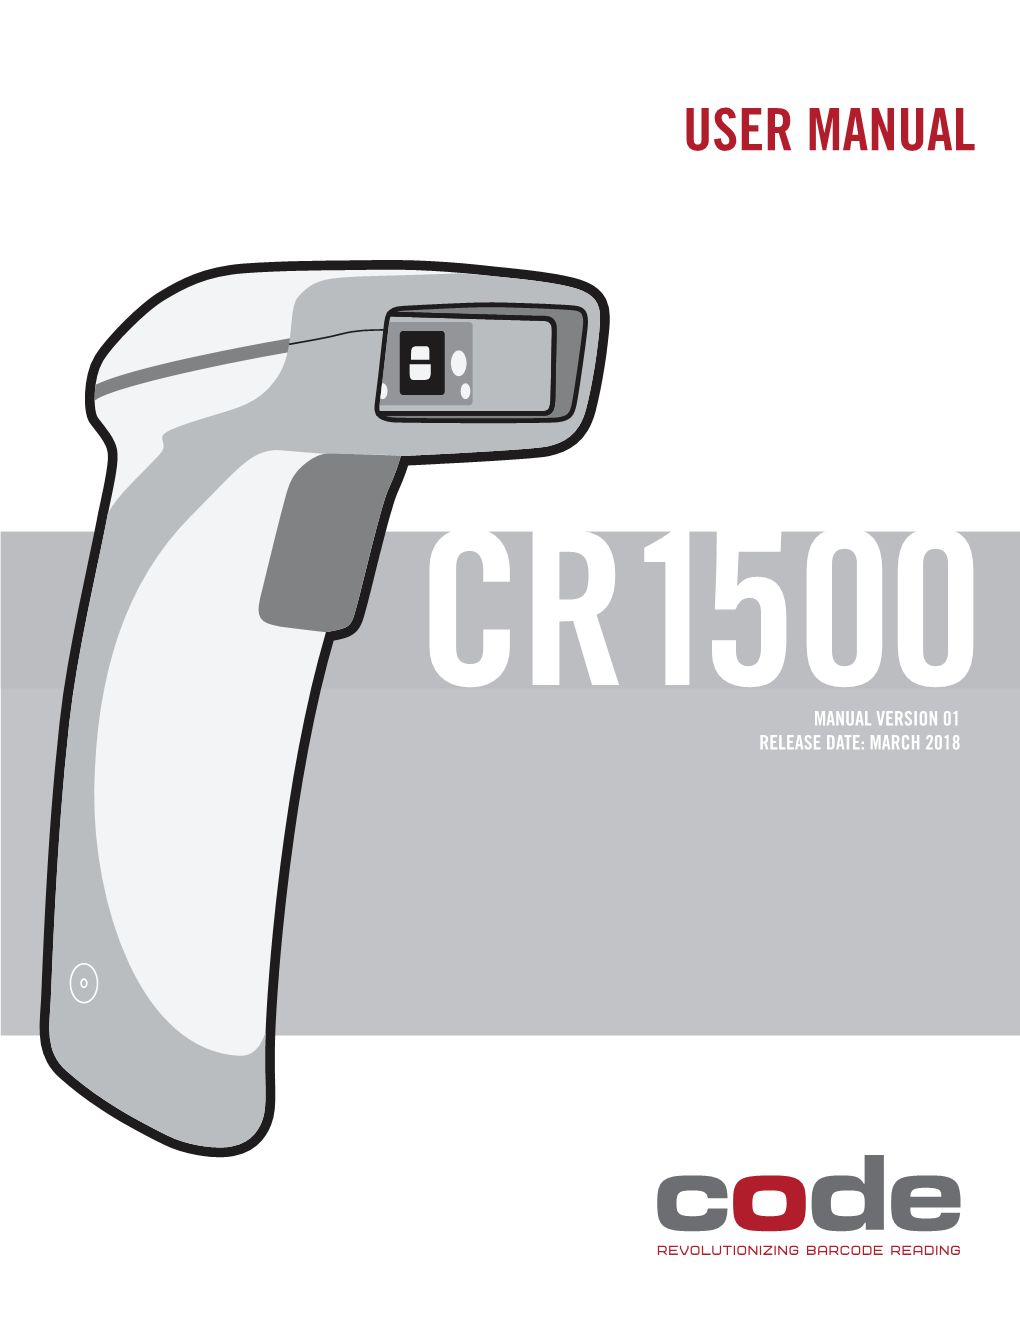 CR1500MANUAL VERSION 01 RELEASE DATE: MARCH 2018 Statement of Agency Compliance